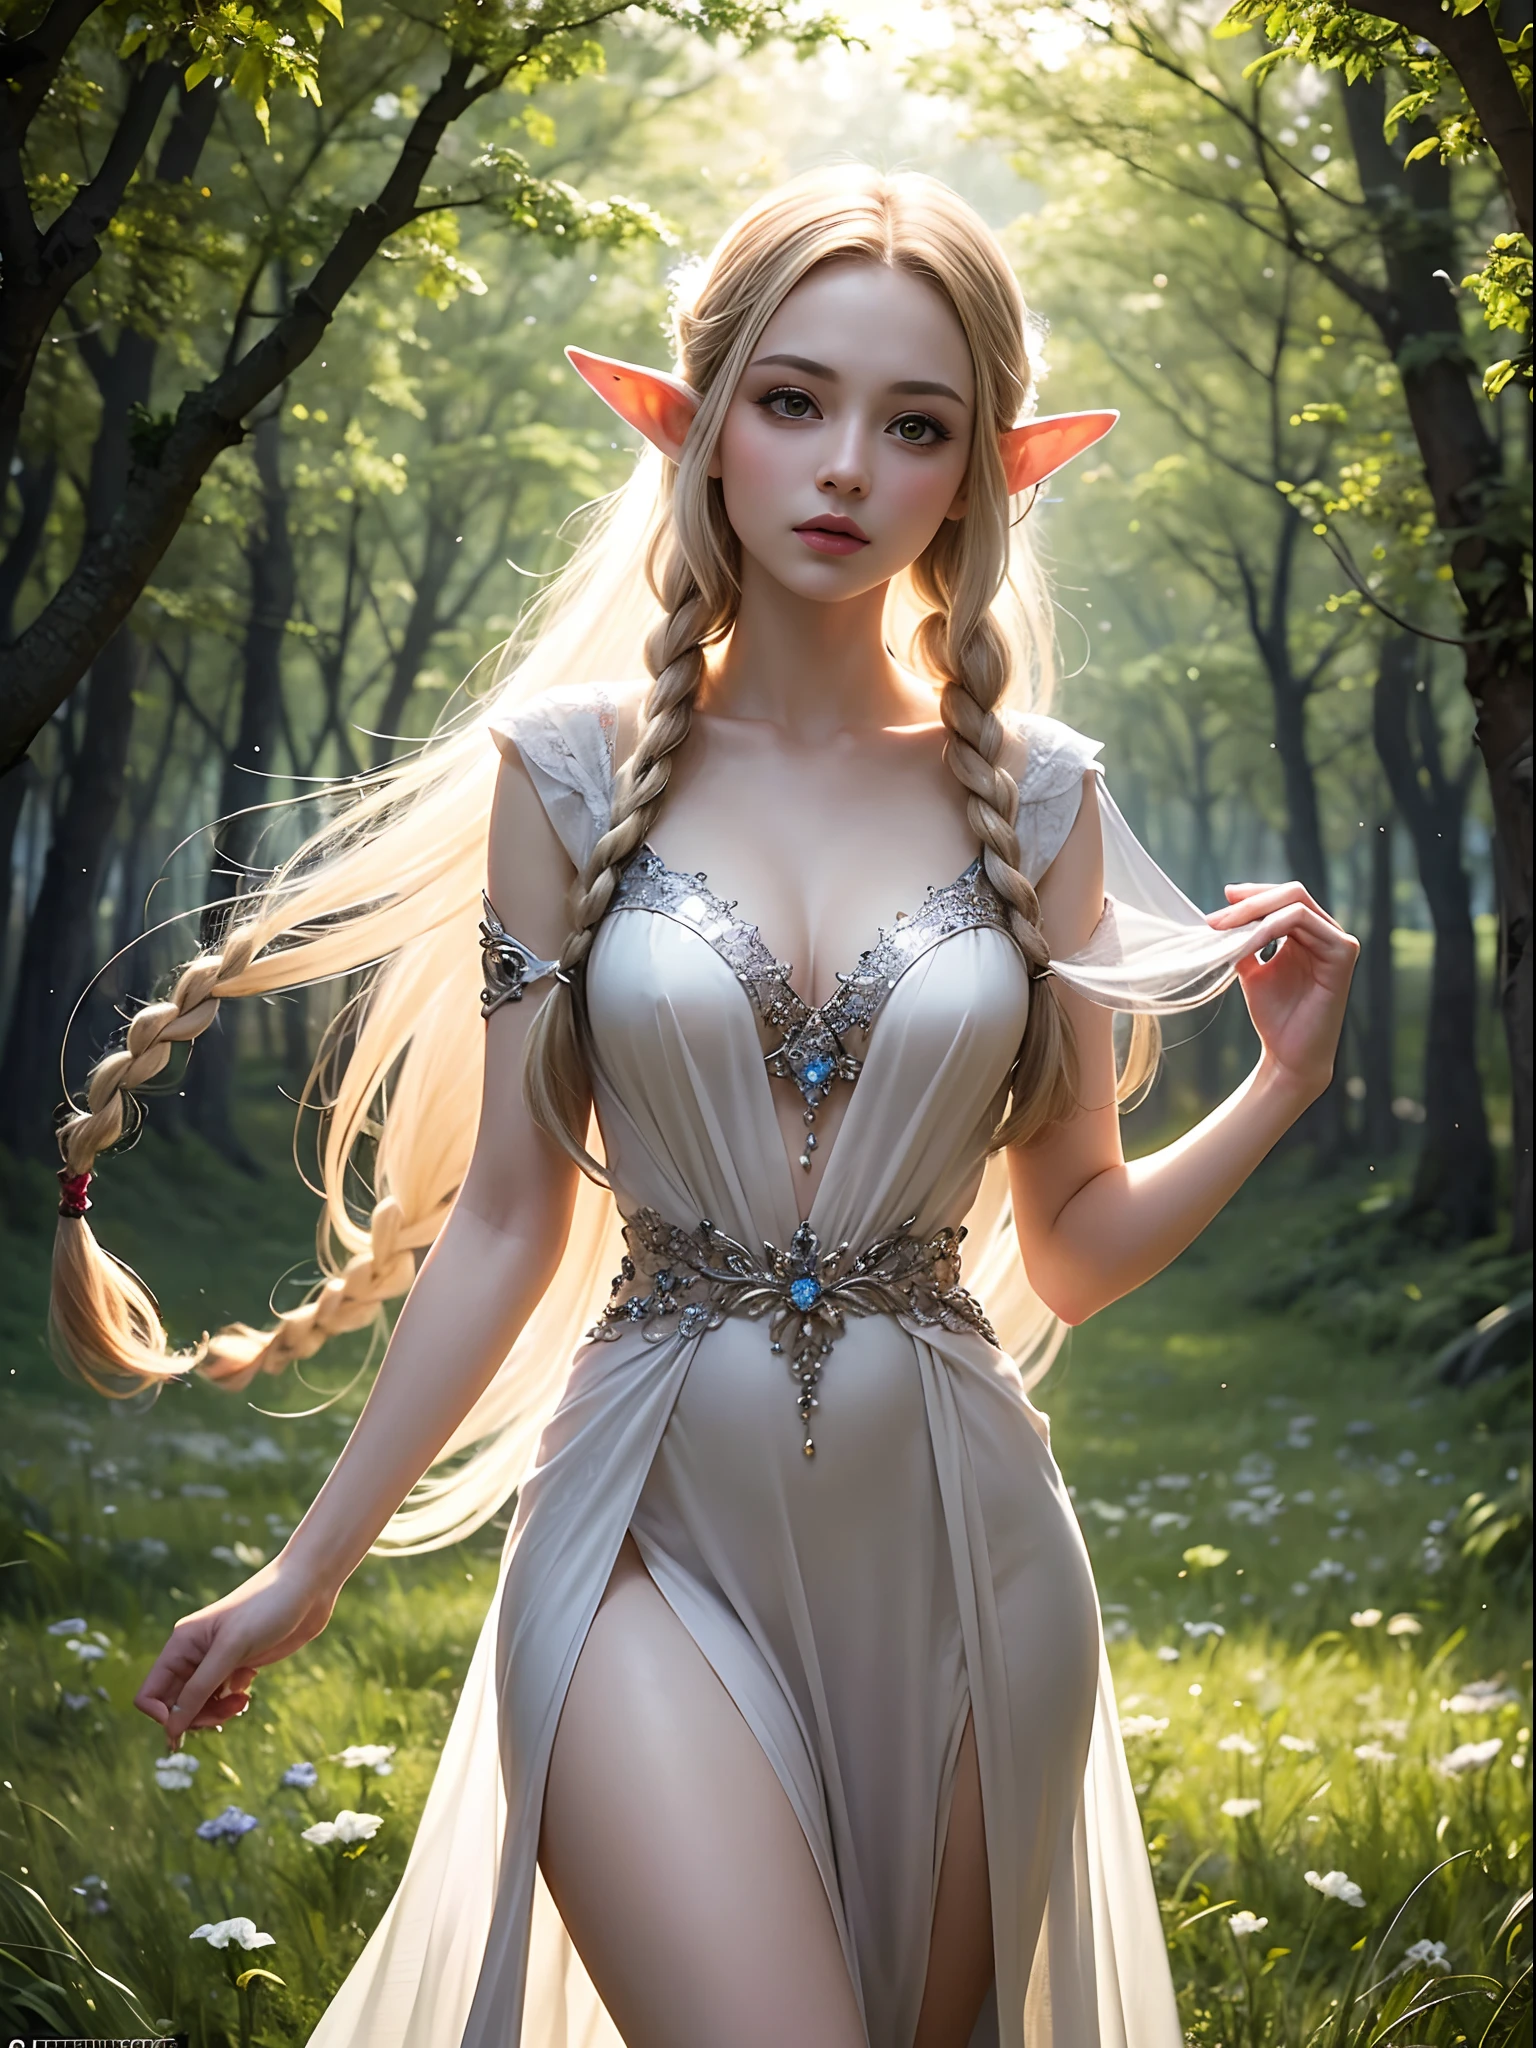 Graceful elven girl standing in the meadow, A delicate face illuminated by the soft light of the setting sun. Her long, Flowing hair flows down the back, Decorated with intricate braids、Adorned with sparkling gemstones. This stunning painting is、It captures the ethereal beauty of elves. Her slender figure in a silk dress、Swaying in the soft meadow breeze. Attention to detail、It is evident in the intricate patterns of the dress and the subtle highlights of the luminescence. skin. The breathtaking portrayal of the elven girl is、Create an enchanting atmosphere、It invites the viewer to a magical world.